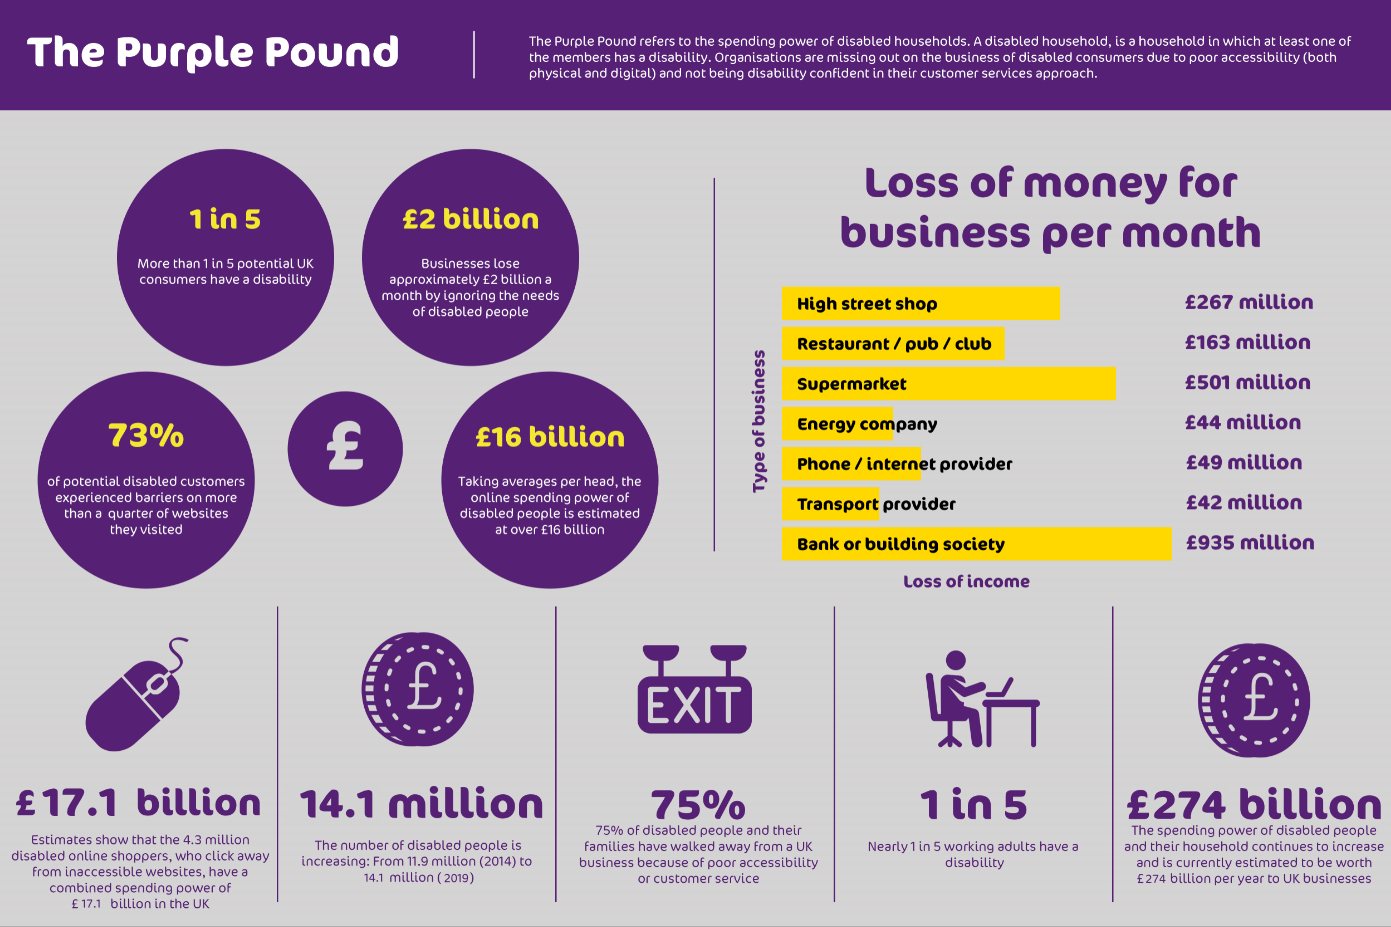 Infographic of the spending power of people with disabilities in the UK - text description below